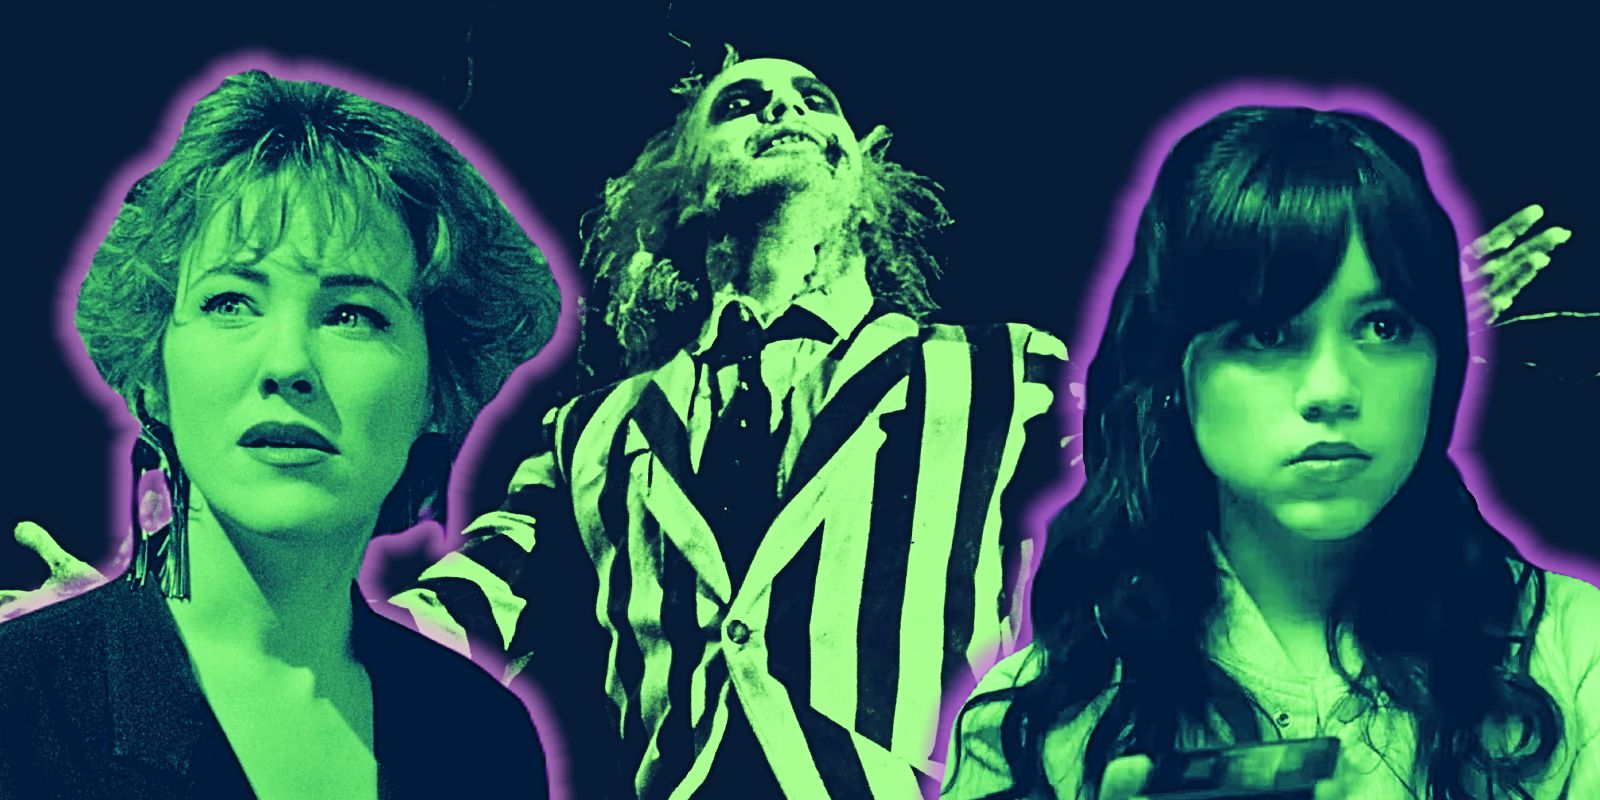 This collage shows Delia, Beetlejuice, and Jenna Ortega's unnamed character which all have a green overlay with a purple outline in Beetlejuice.